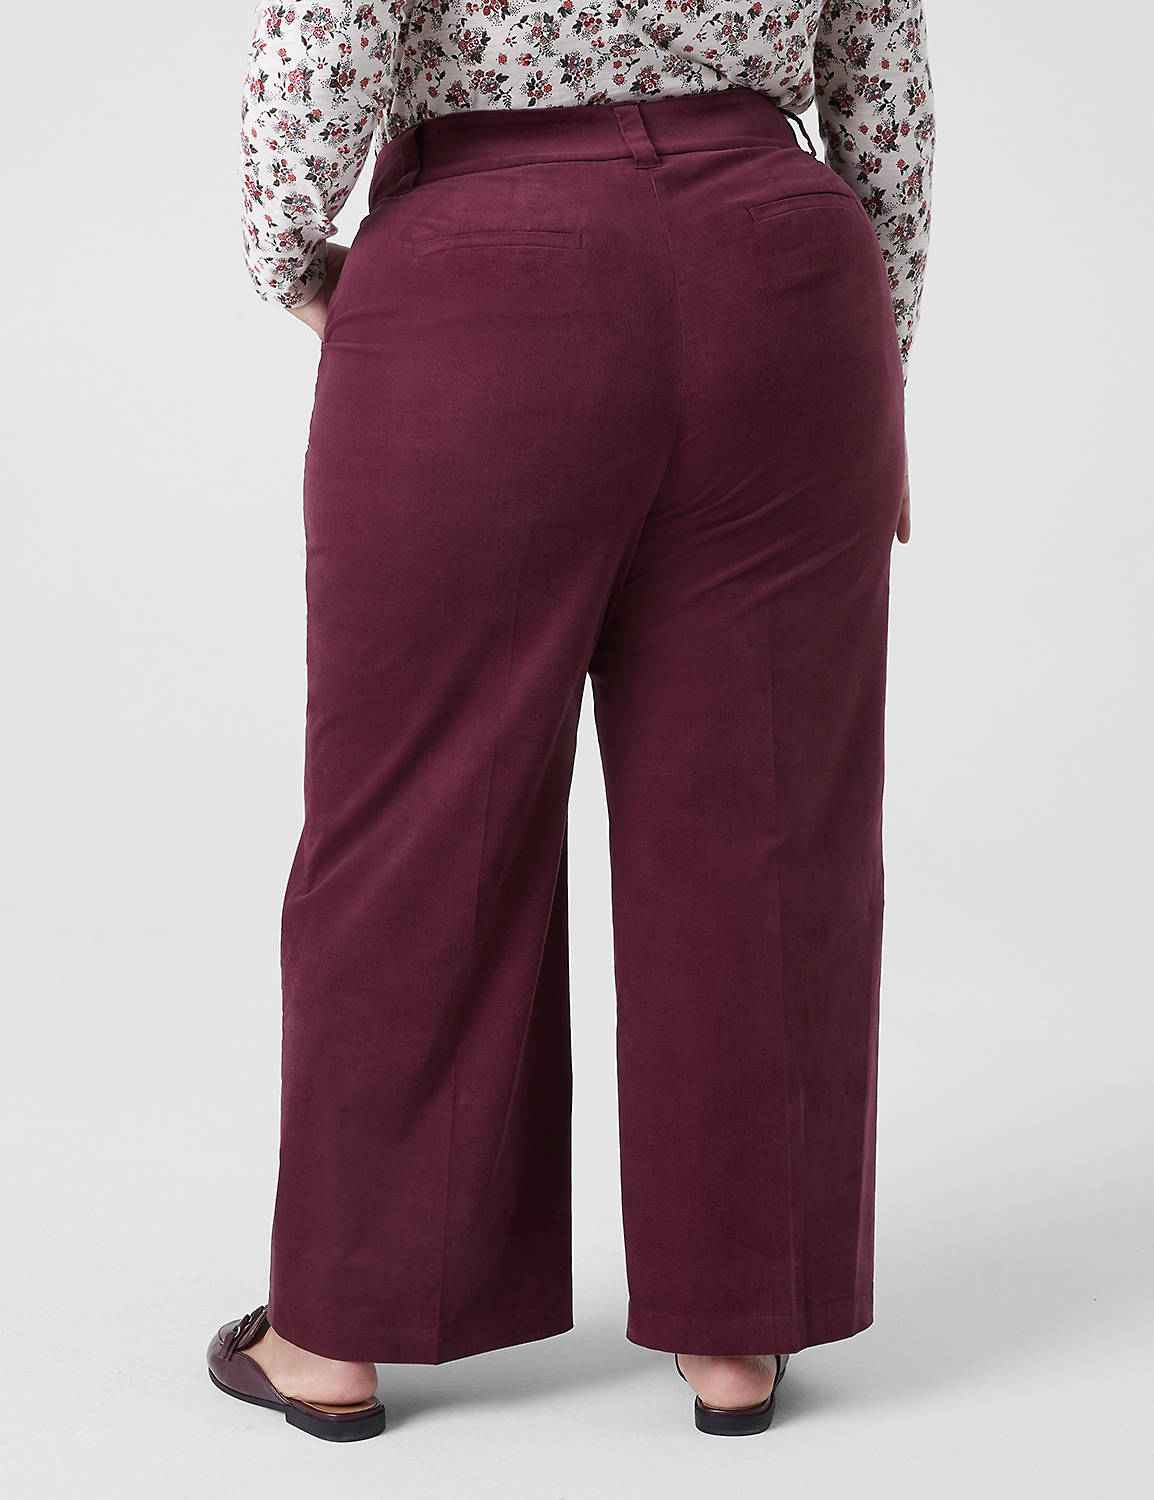 THE CORD TROUSER 1136339 Product Image 2